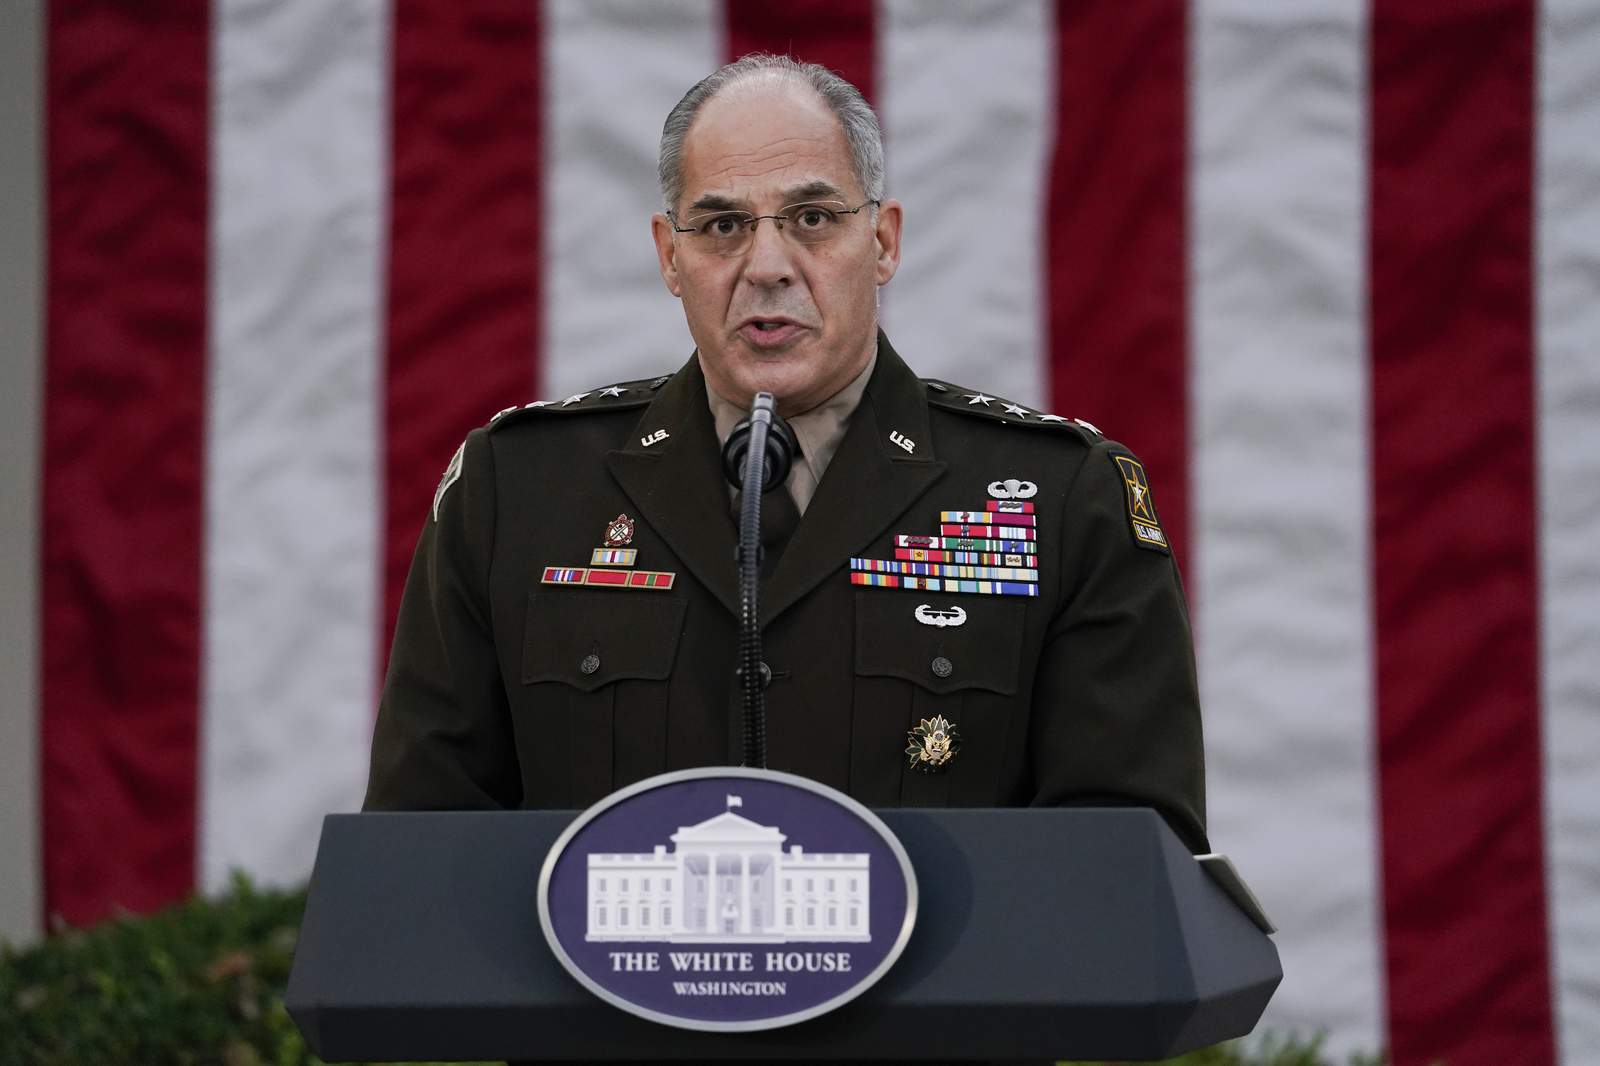 General sorry for 'miscommunication' over vaccine shipments